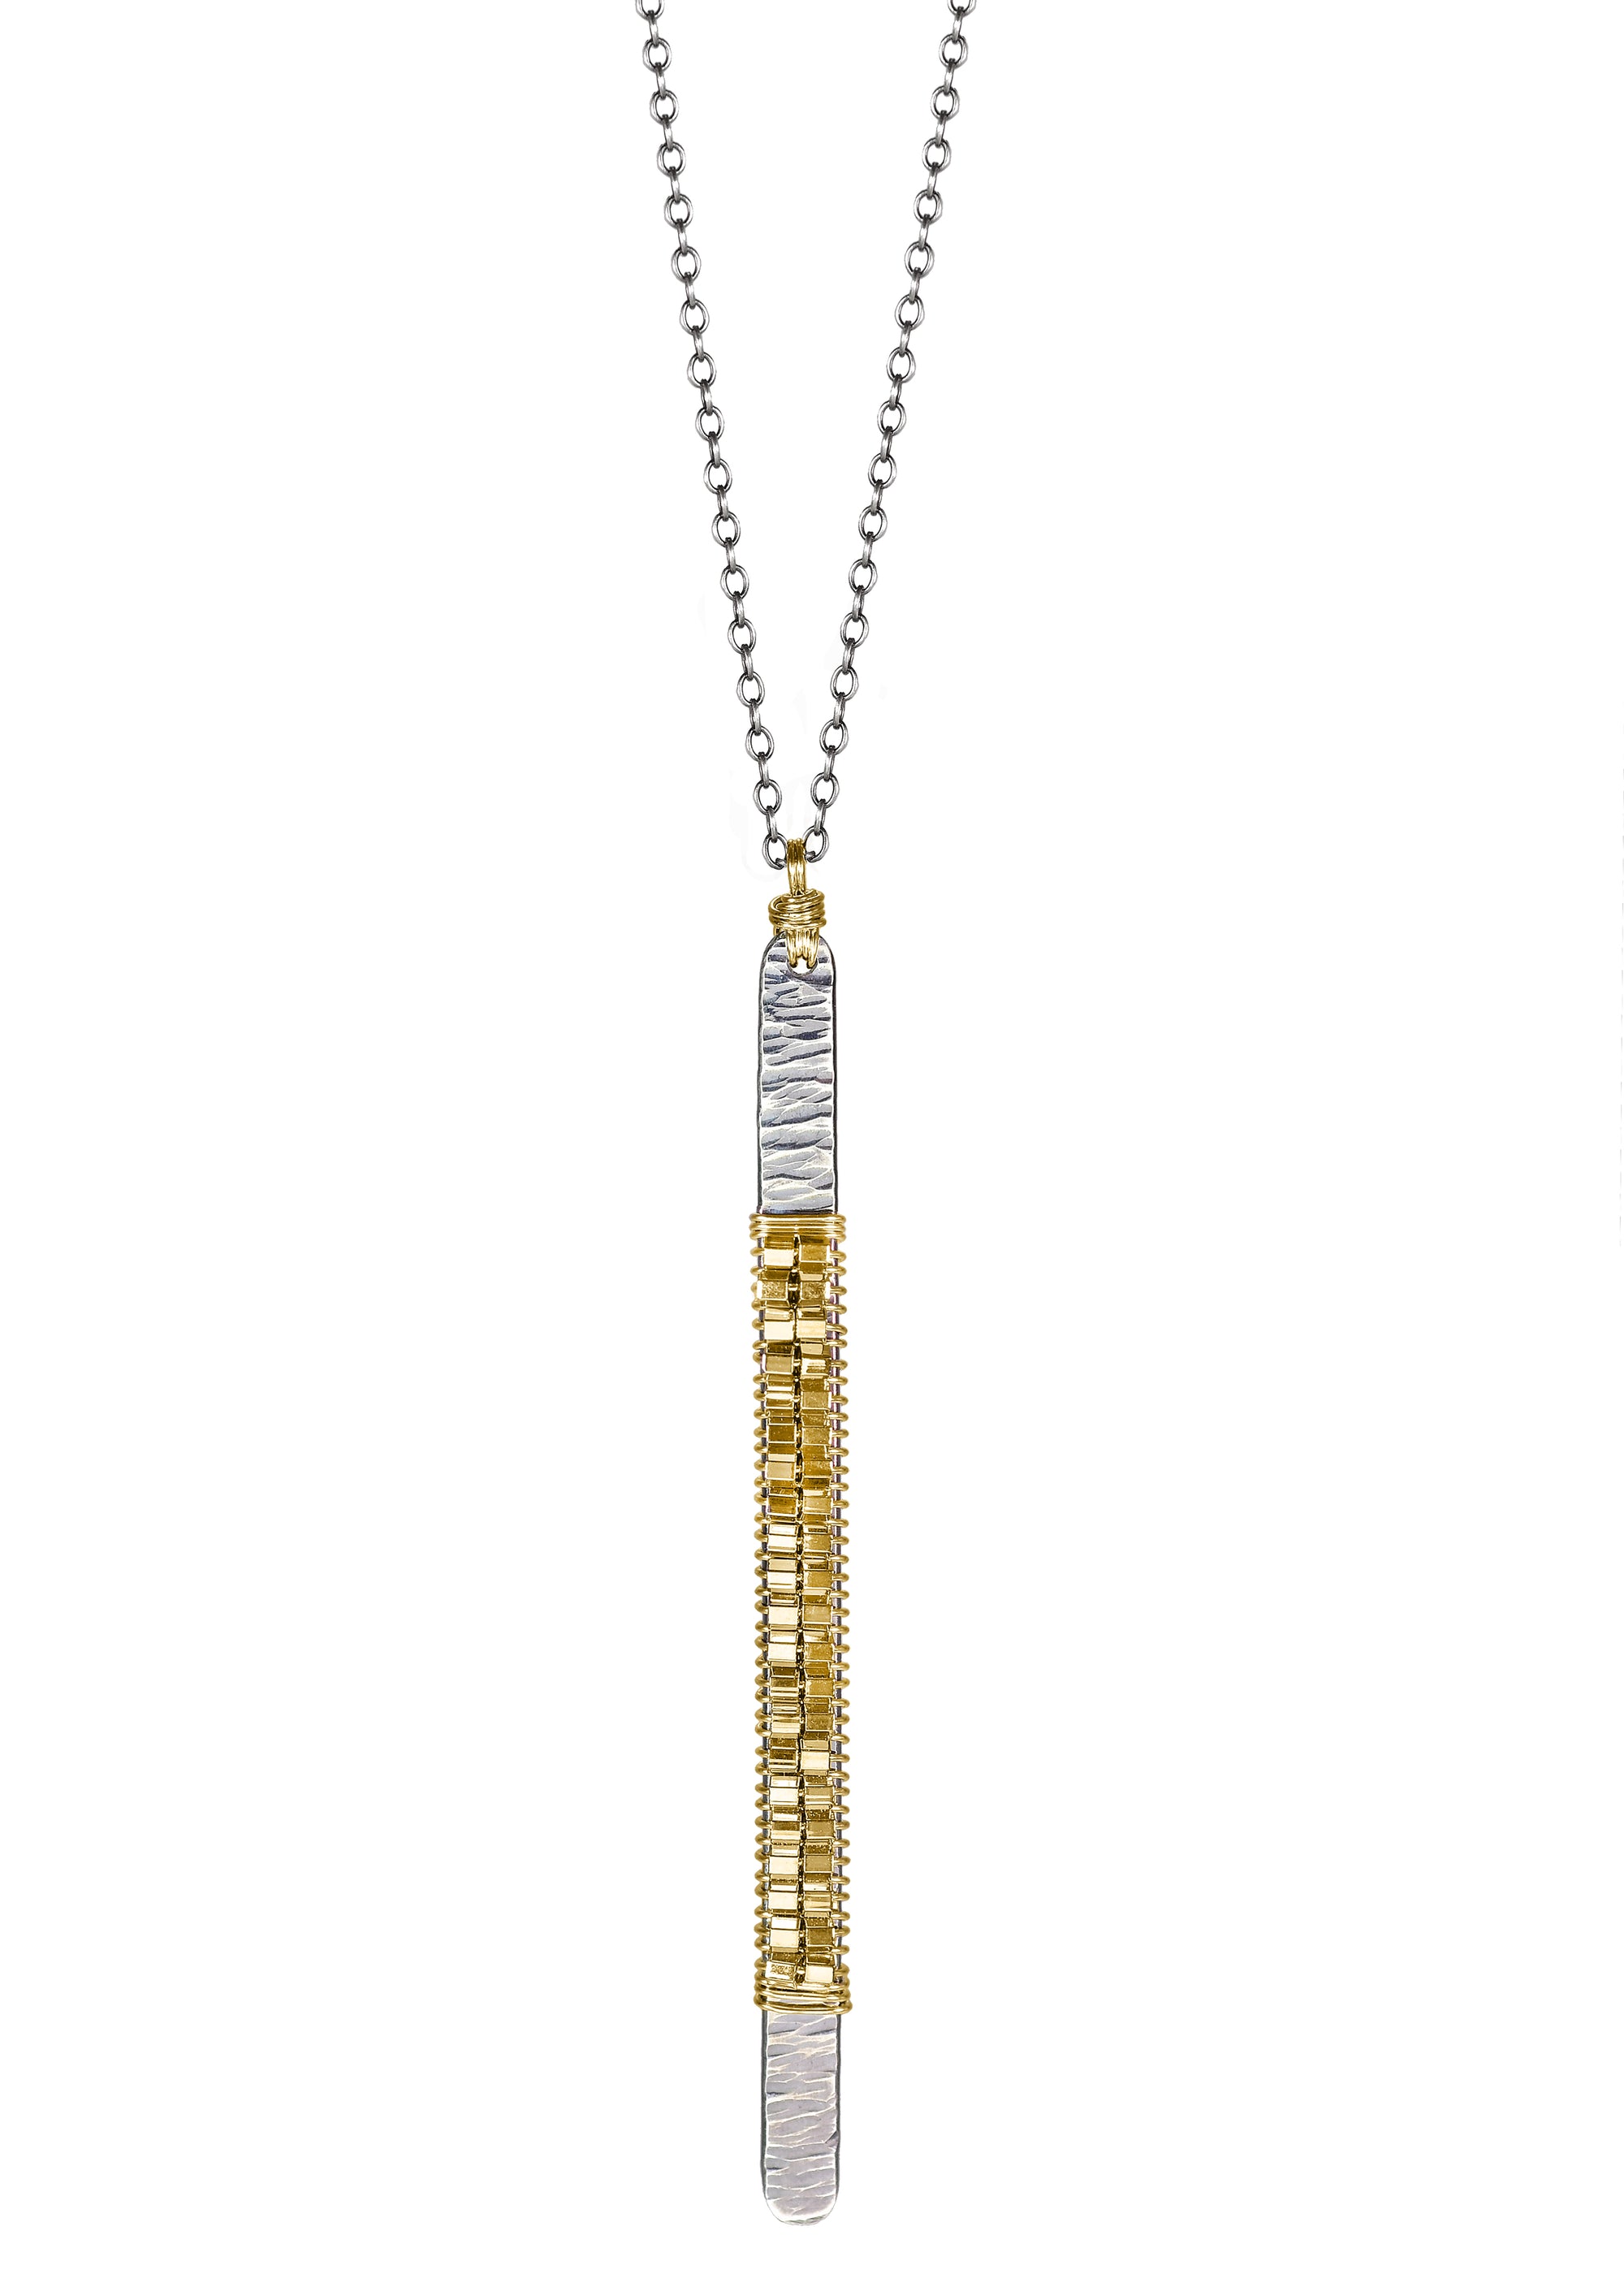 14k gold fill Sterling silver Seed beads Mixed metal measures 16-1/4" in length Pendant measures 1-15/16" in length and 1/8" in width Handmade in our Los Angeles studio